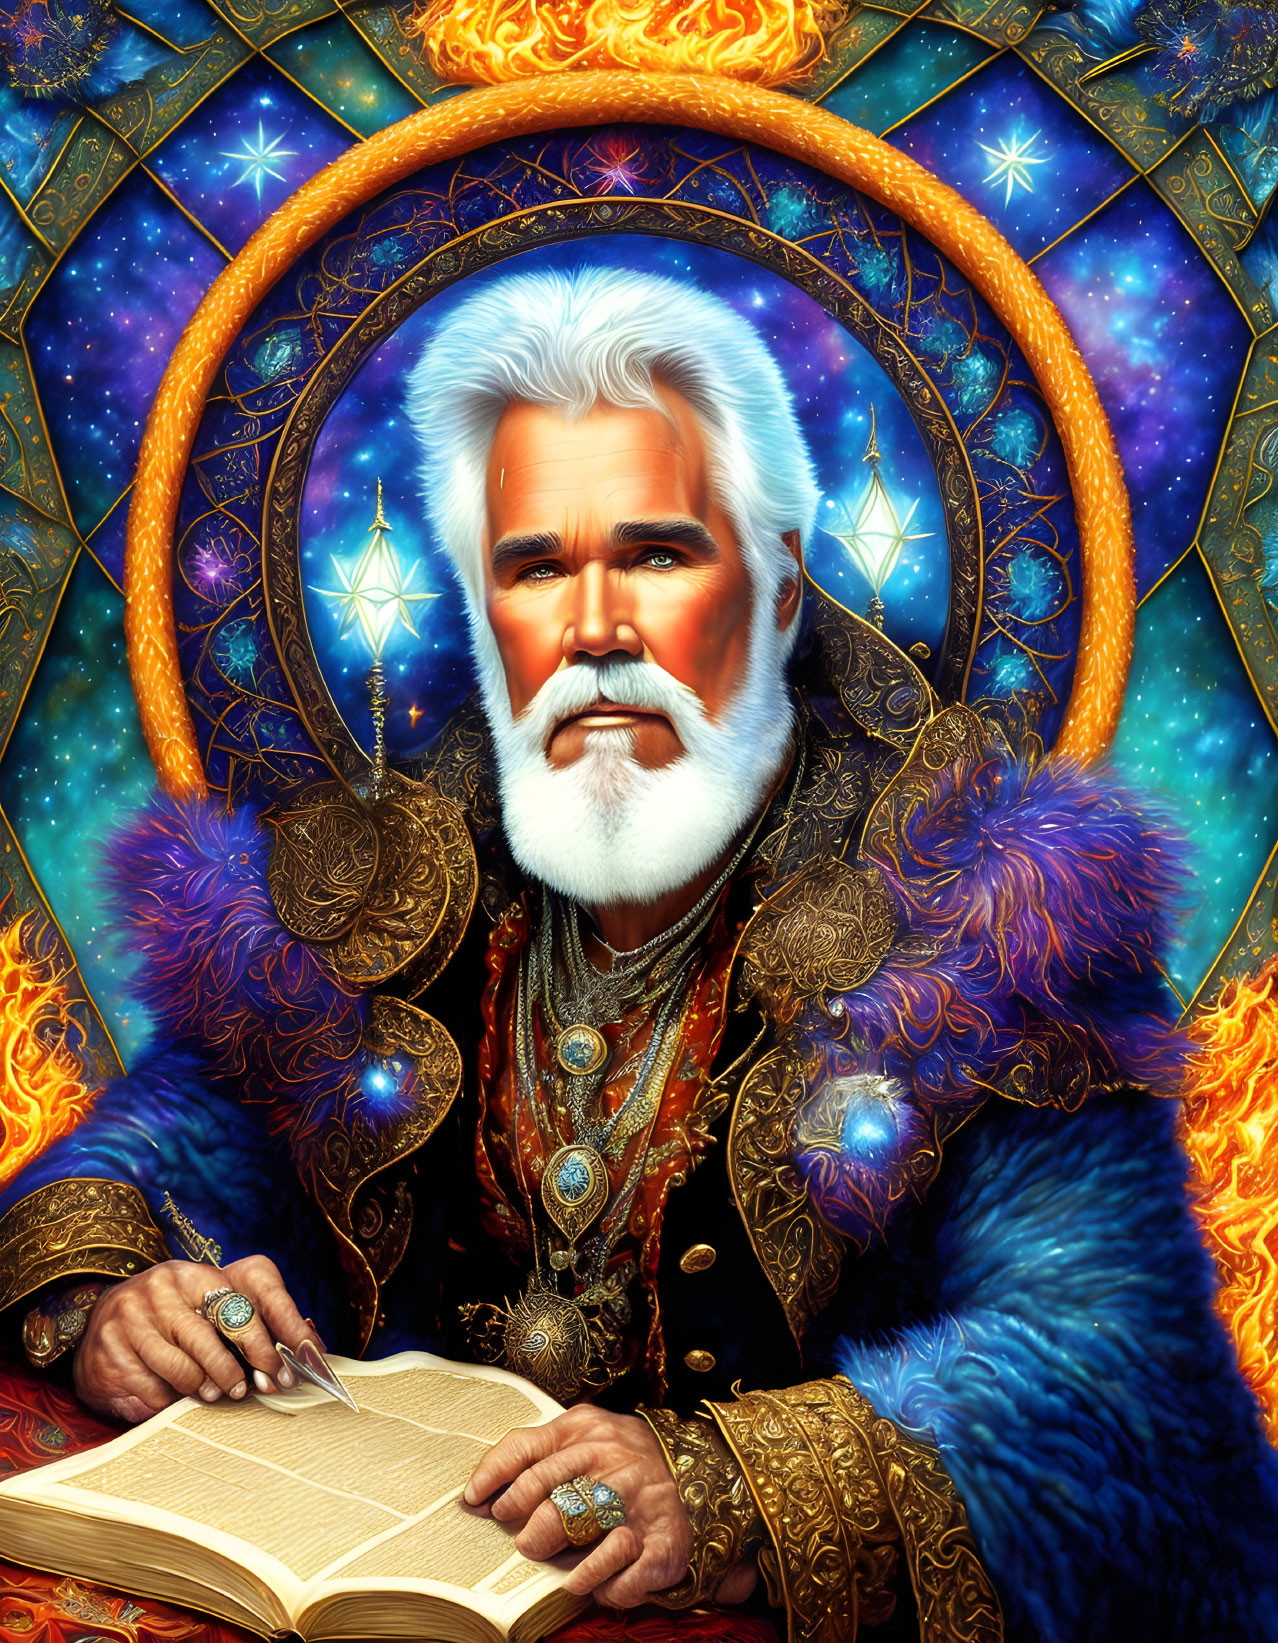 Elderly bearded man in celestial robes with book, rings, and fiery halo